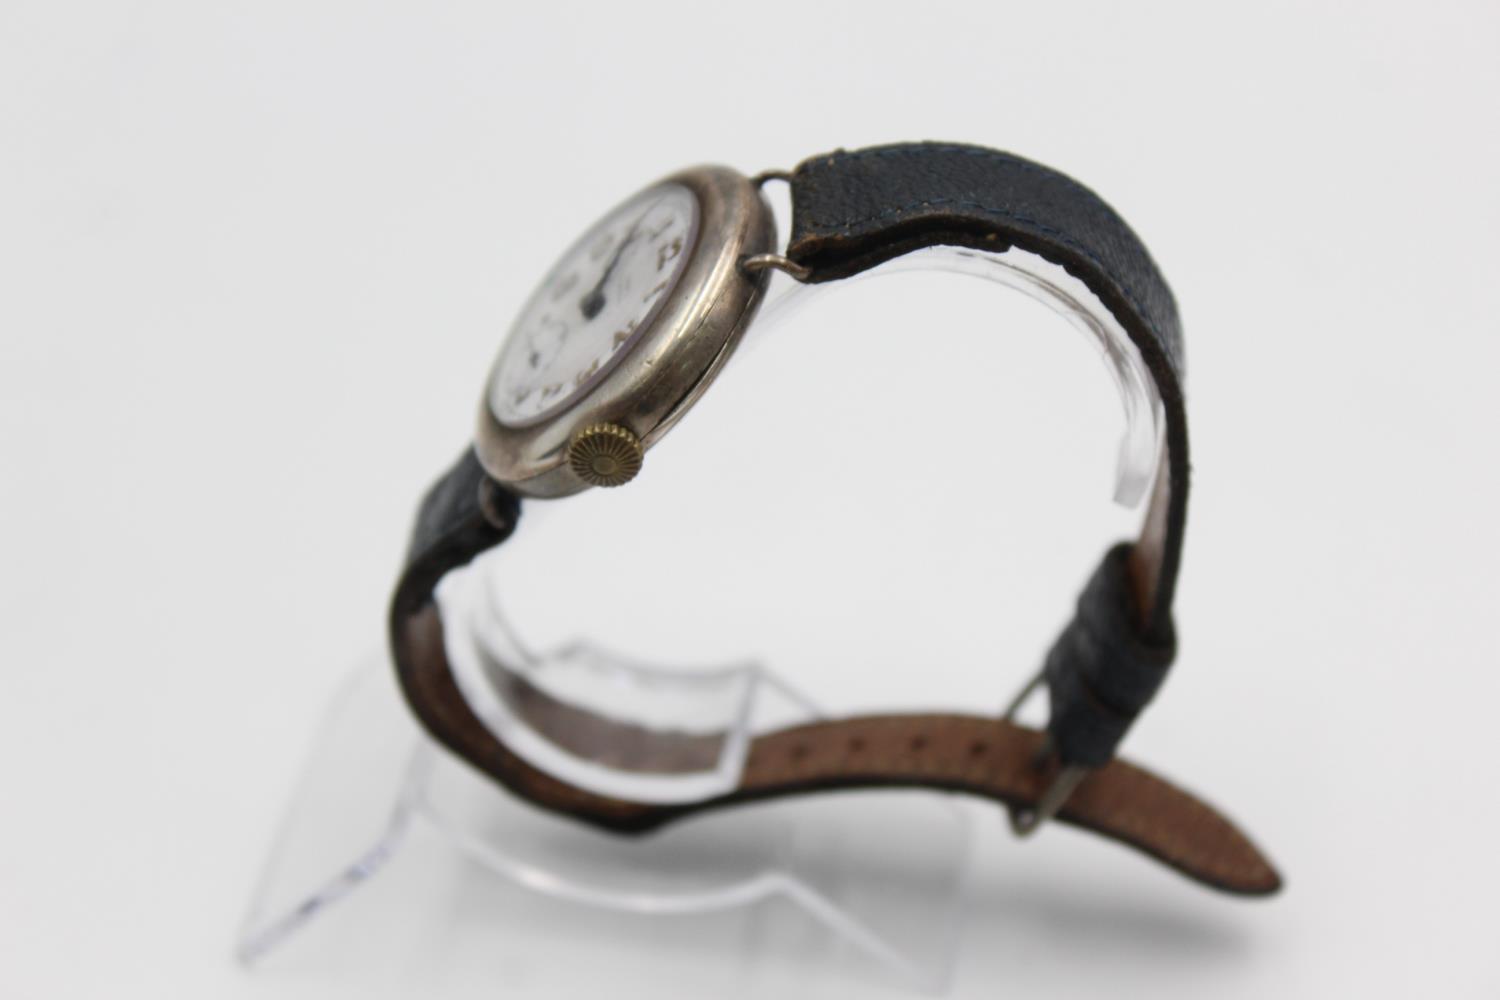 Vintage Gents Trench Style .925 SILVER WRISTWATCH HEAD Hand-Wind WORKING Vintage Gents Trench Styl - Image 3 of 4